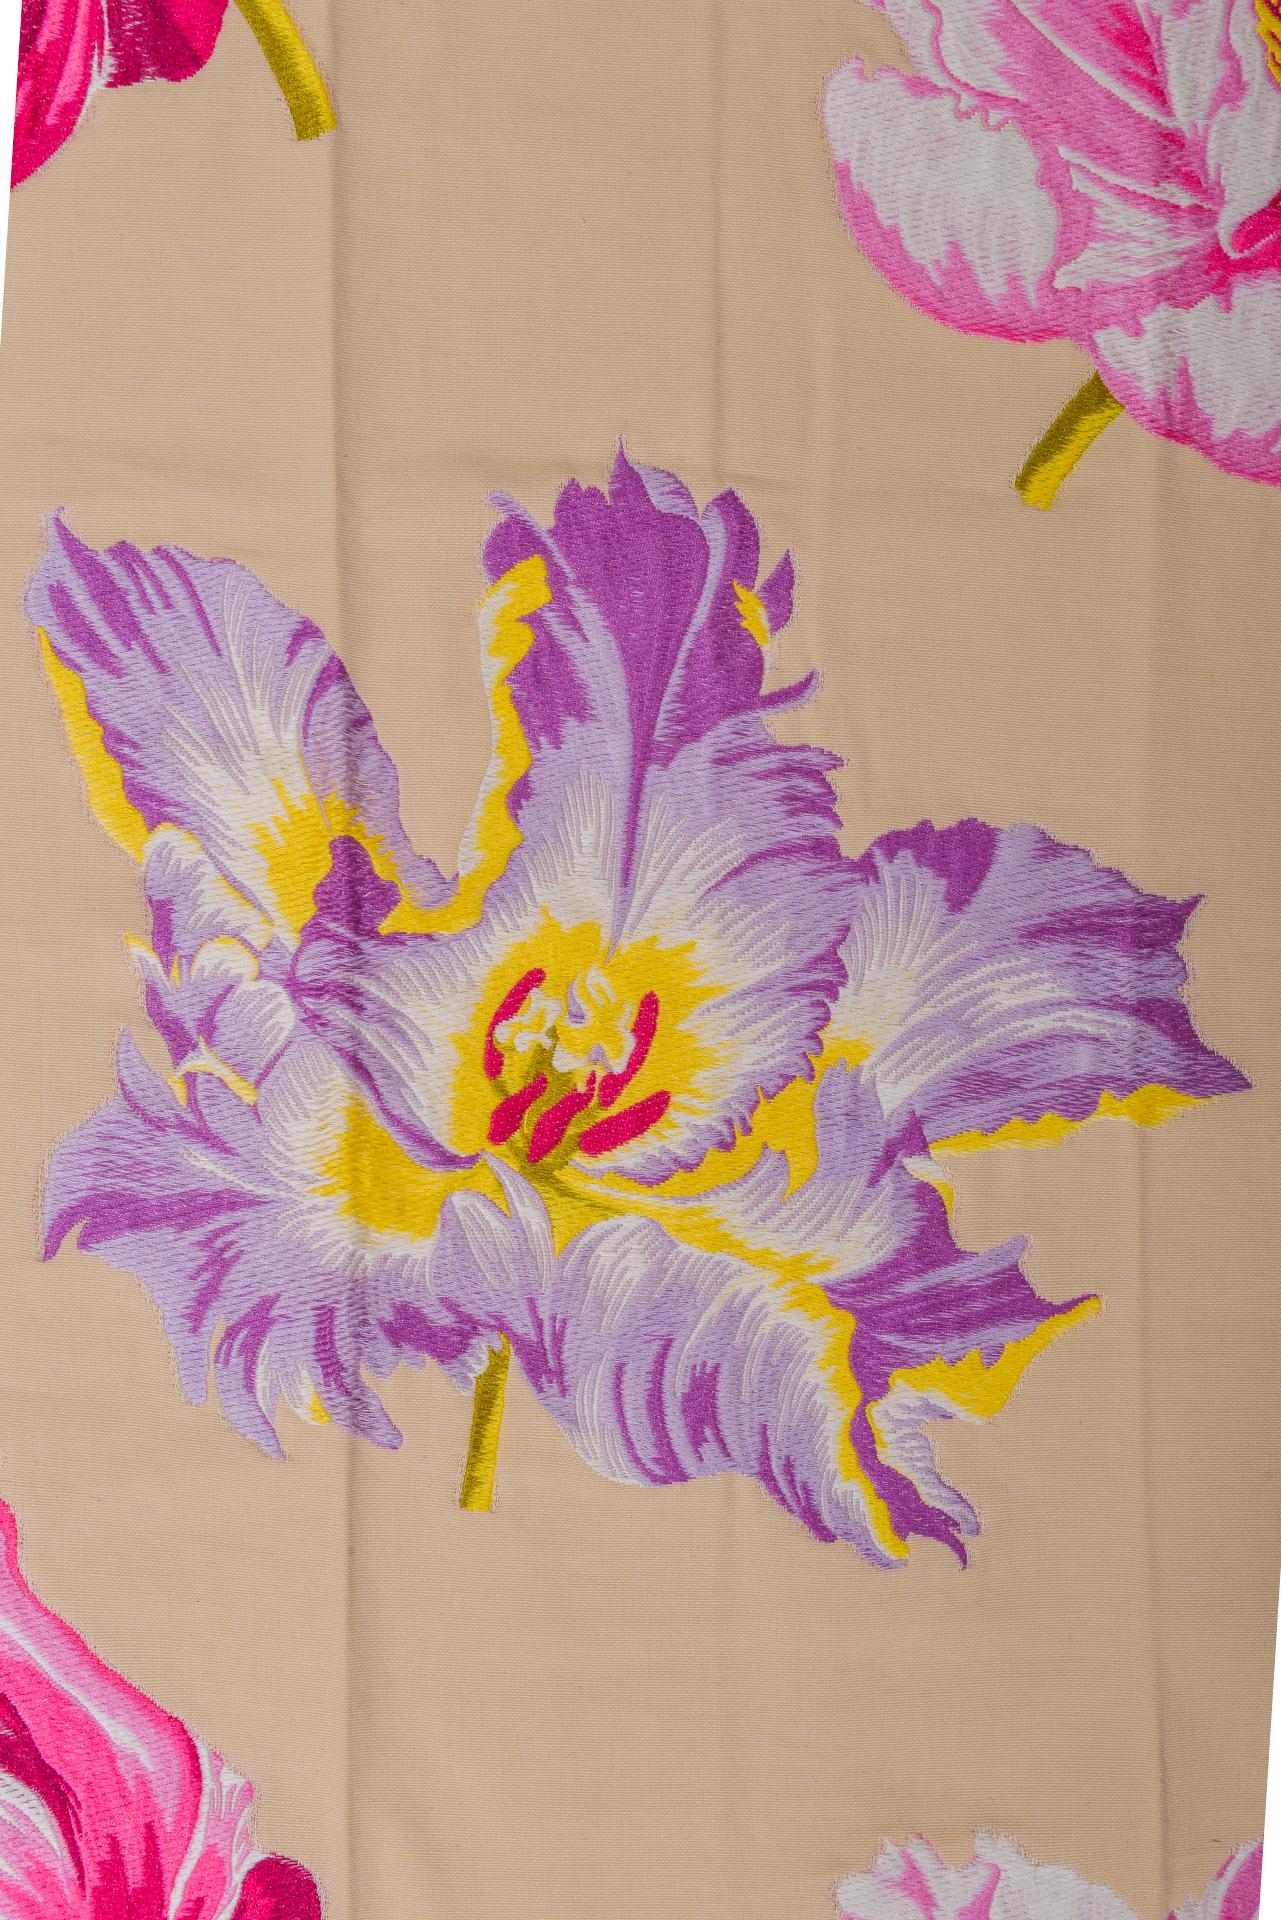 Machine-Made Lampas Textile Fabric Remnant with Large Flowers: Make an OFFER For Sale